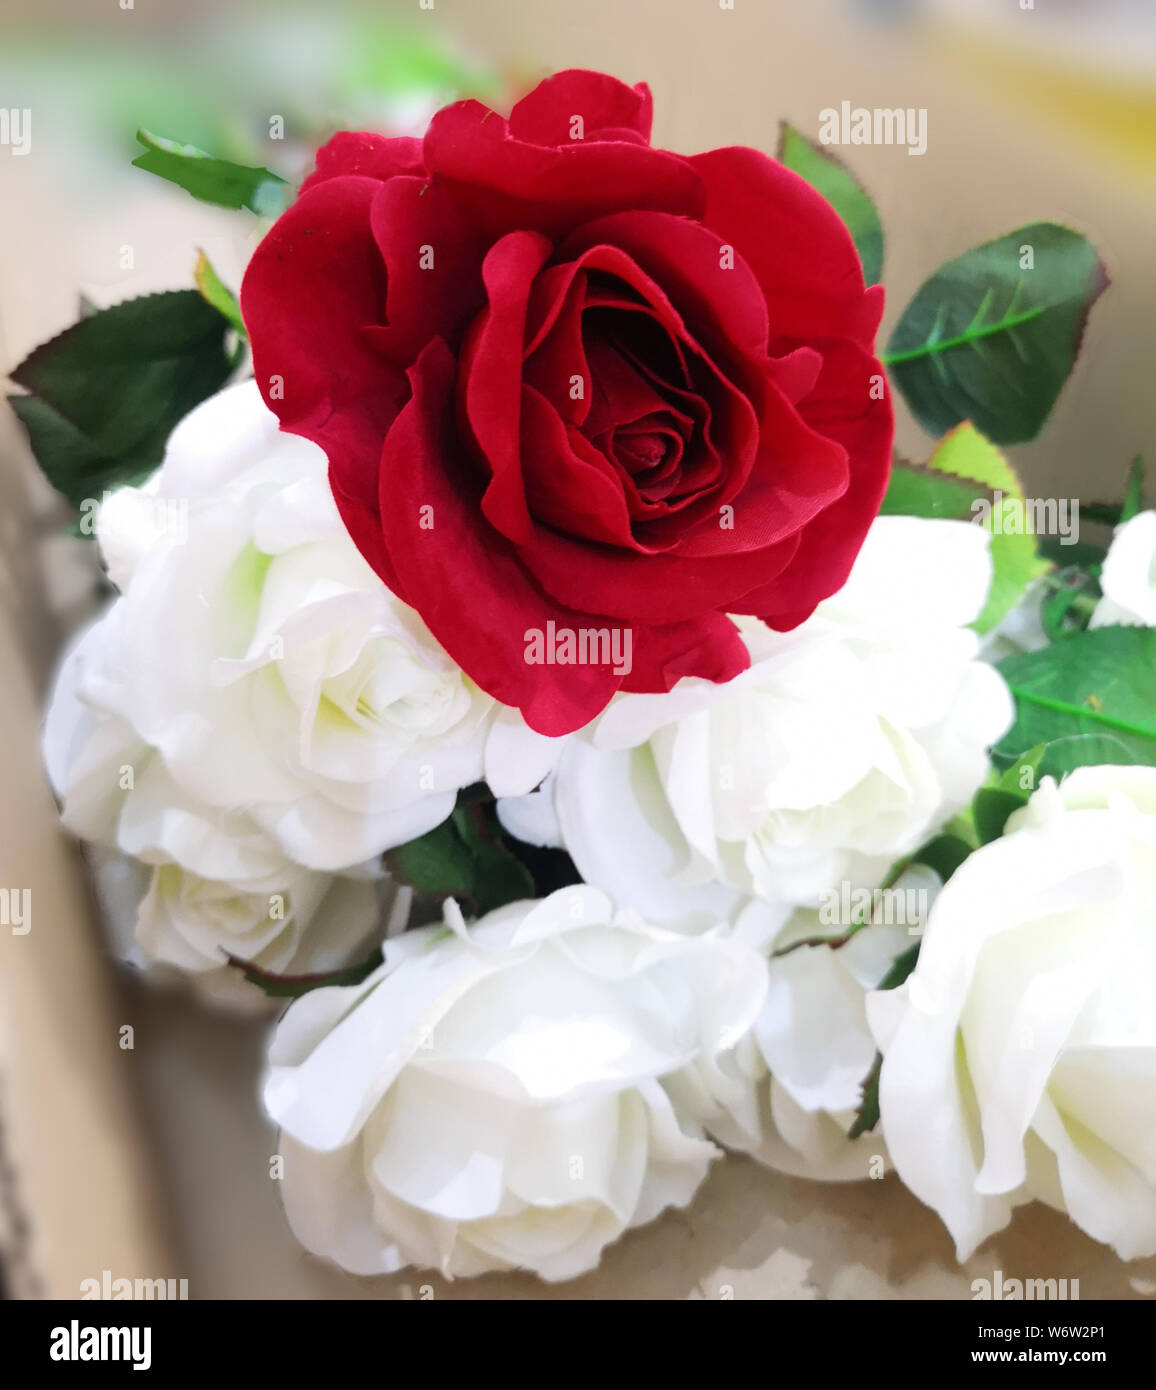 red and white rose beautiful bouquet artificial Handmade Stock ...